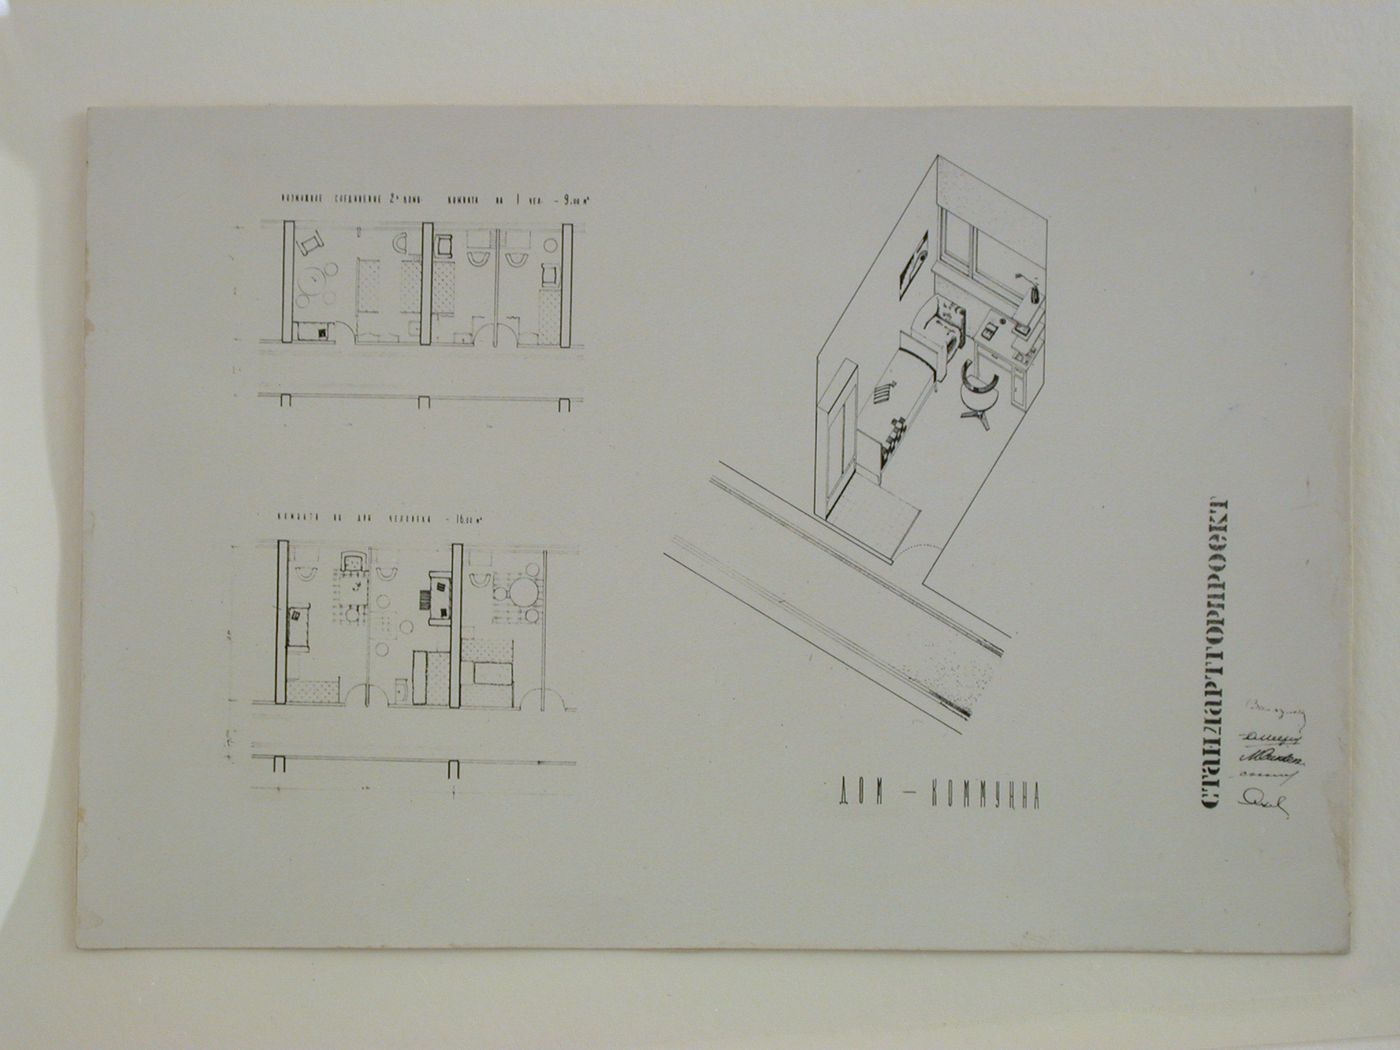 Photograph of room plans and a perspective drawing for a house-commune, Krasnaia Presnia Street, Moscow